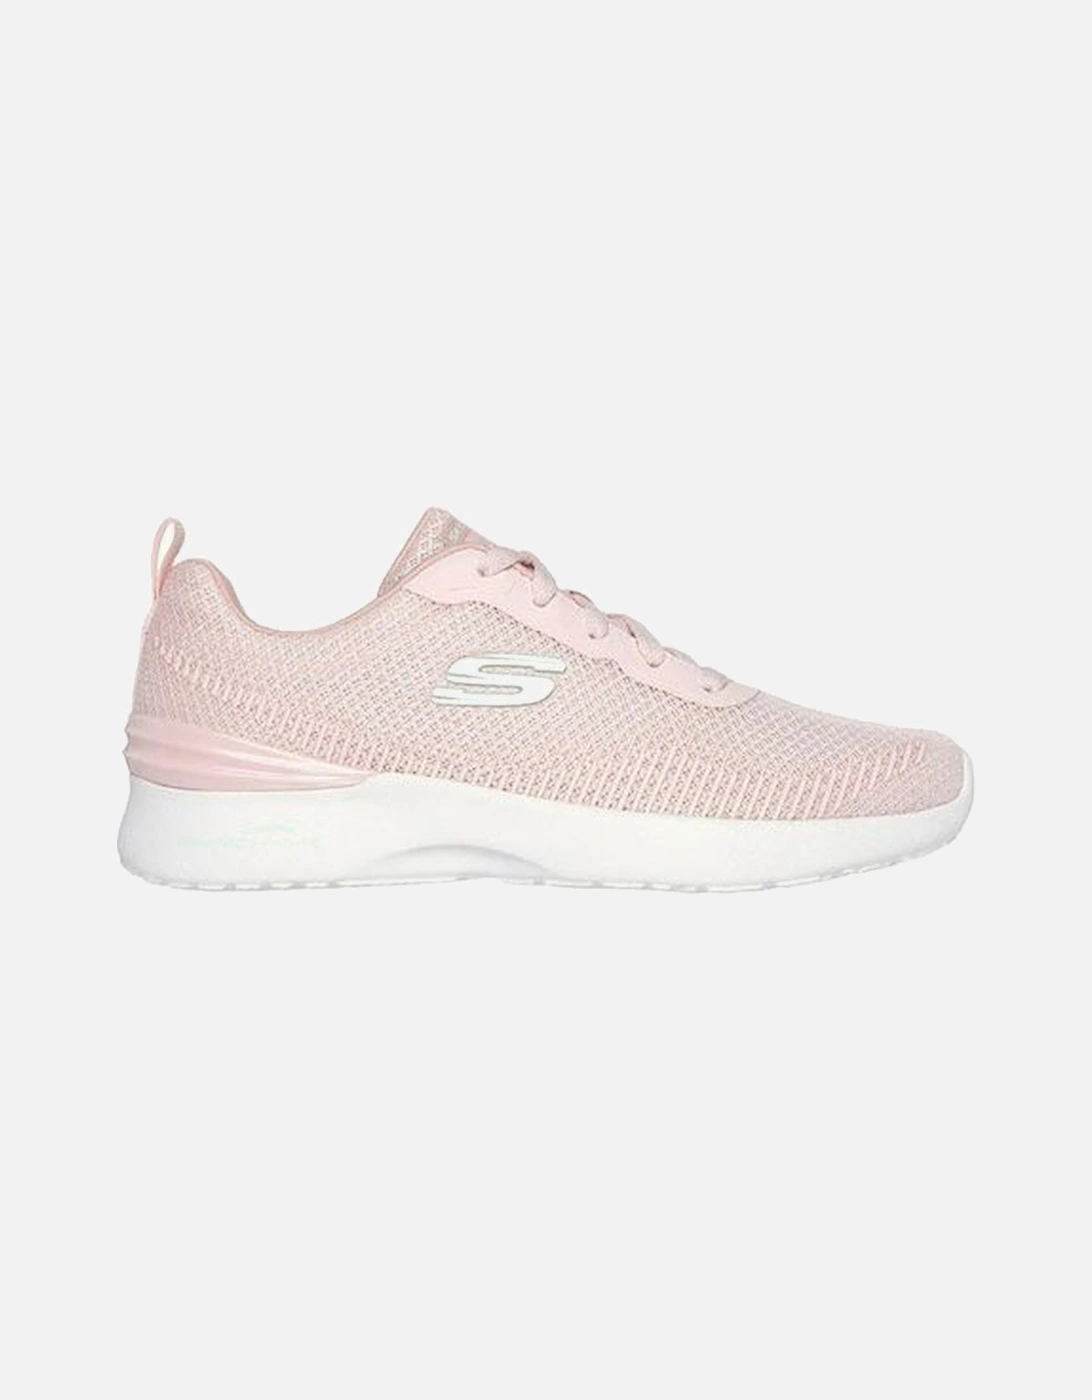 149758 Skech Air Dynamight in light pink, 2 of 1